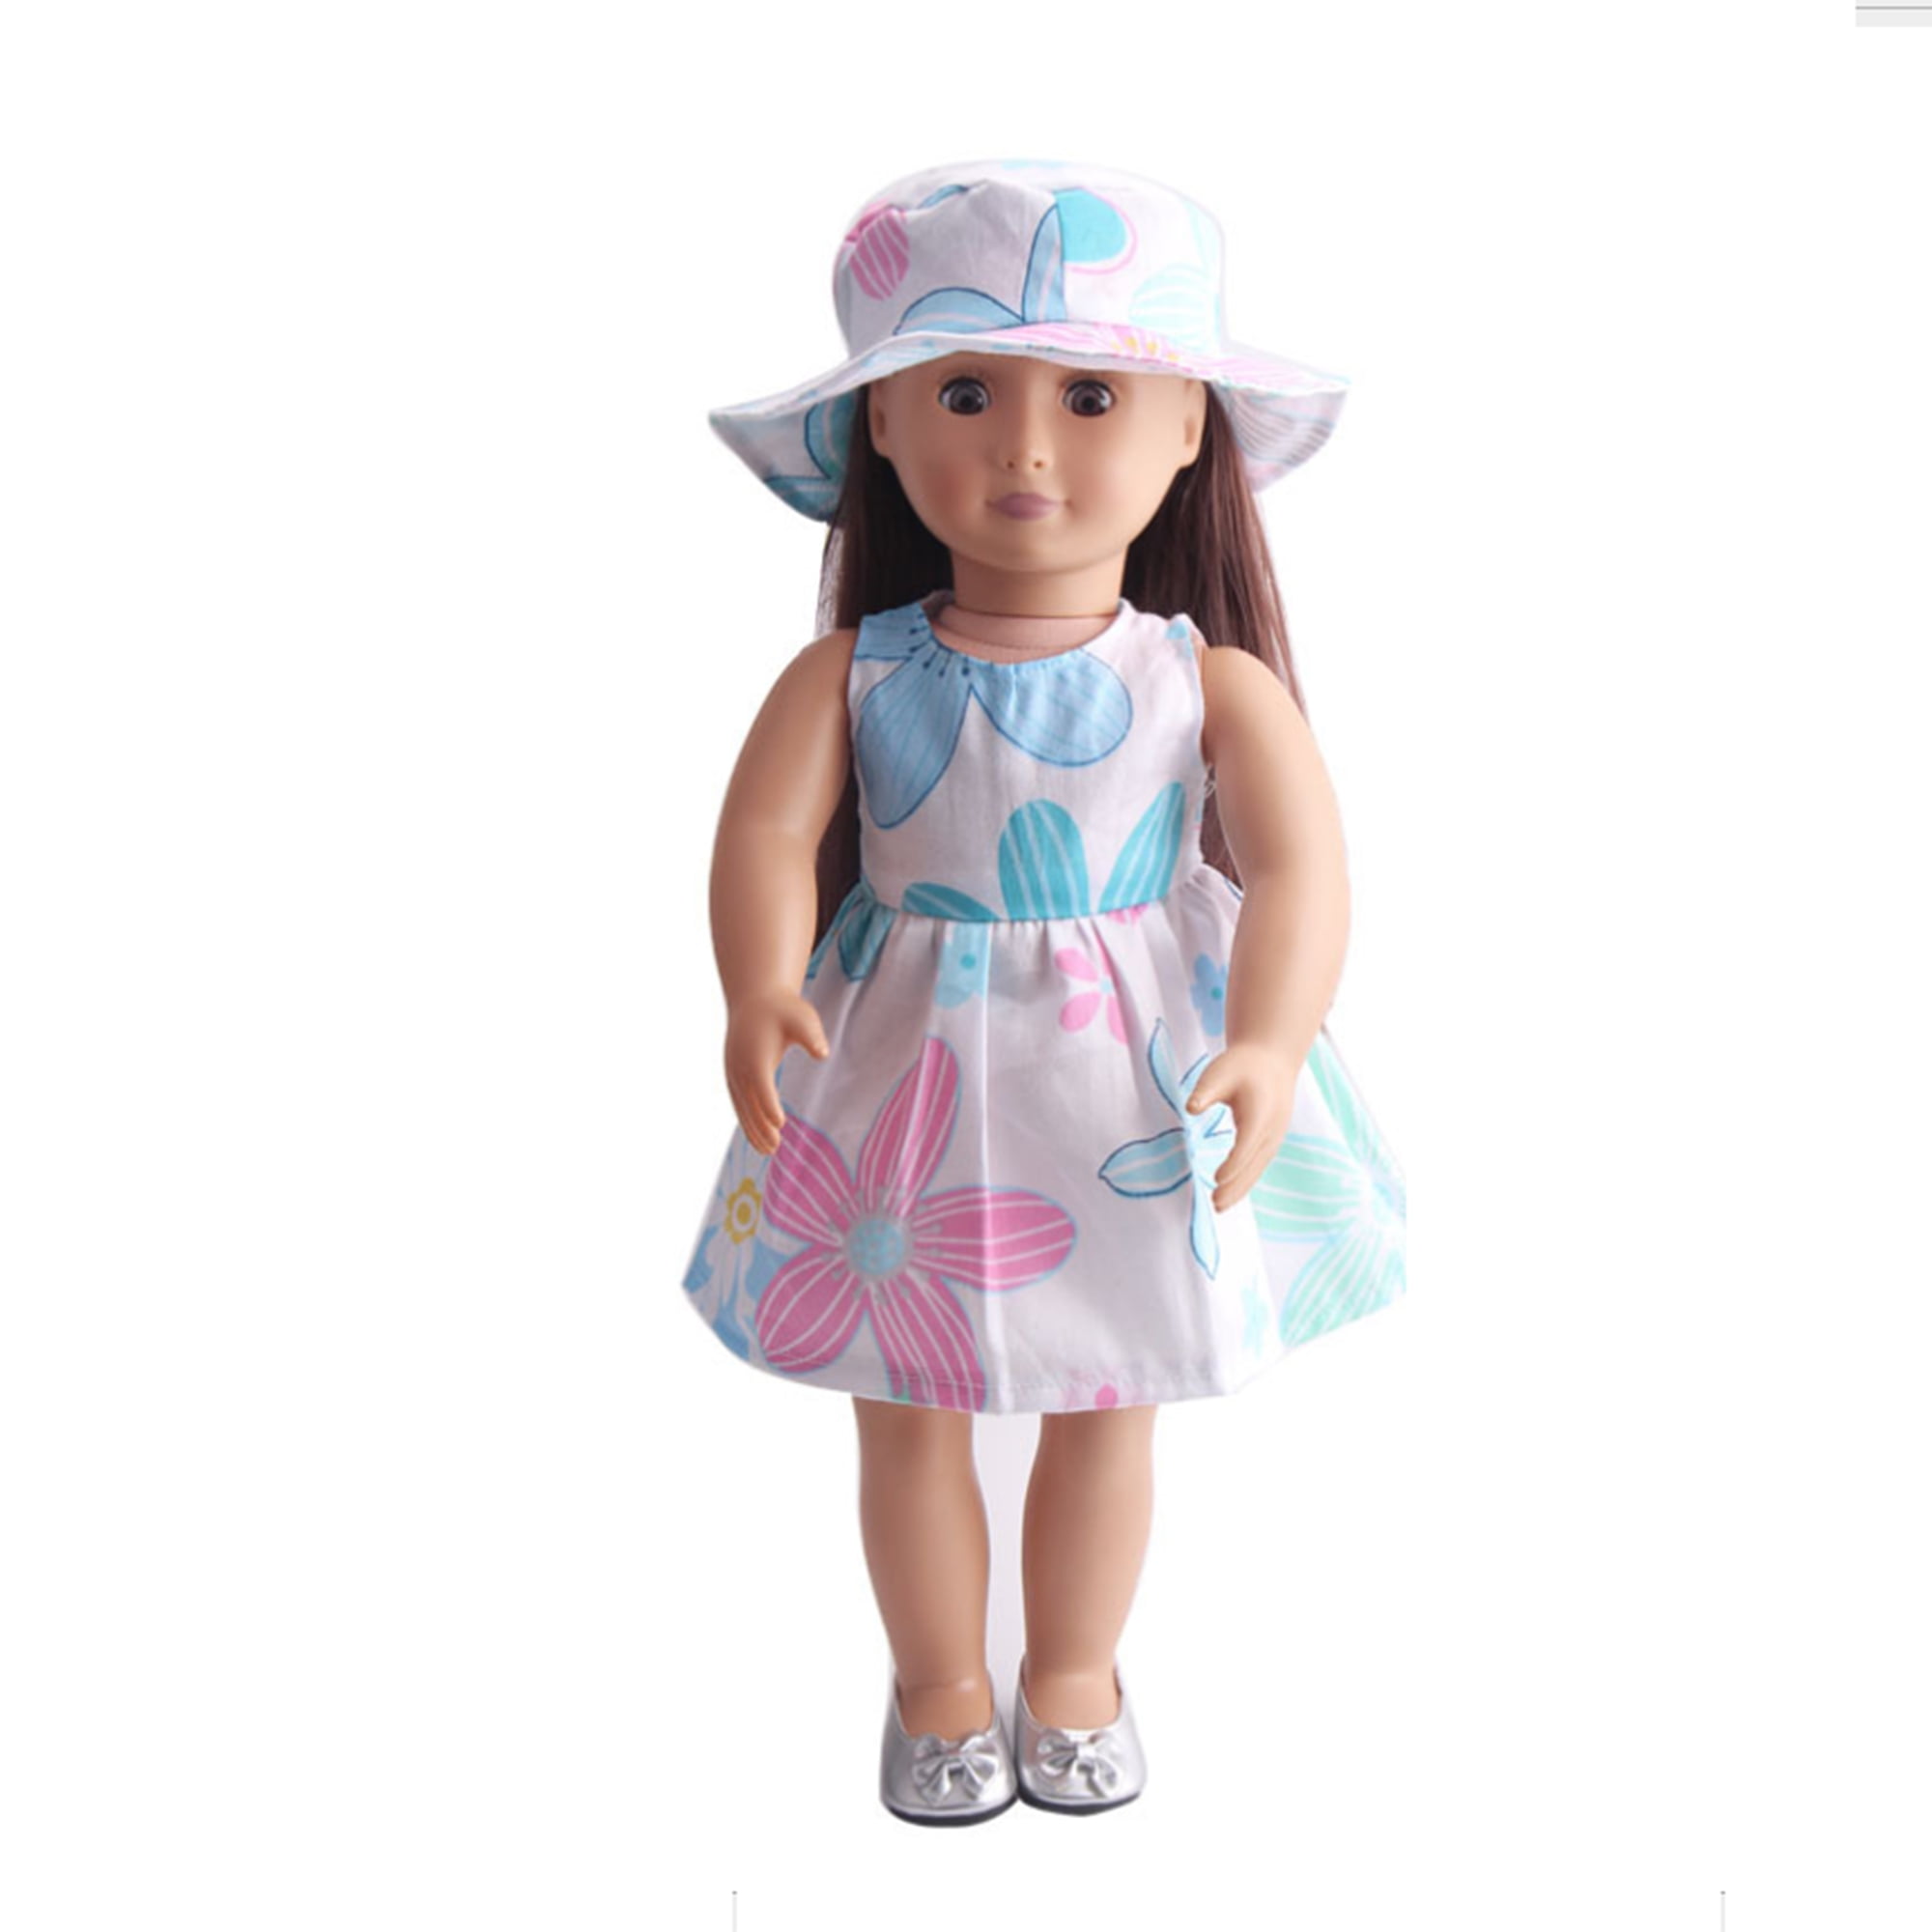 AMERICAN GIRL OUR GENERATION HANDMADE DRESS For 18” DOLL CLOTHES 